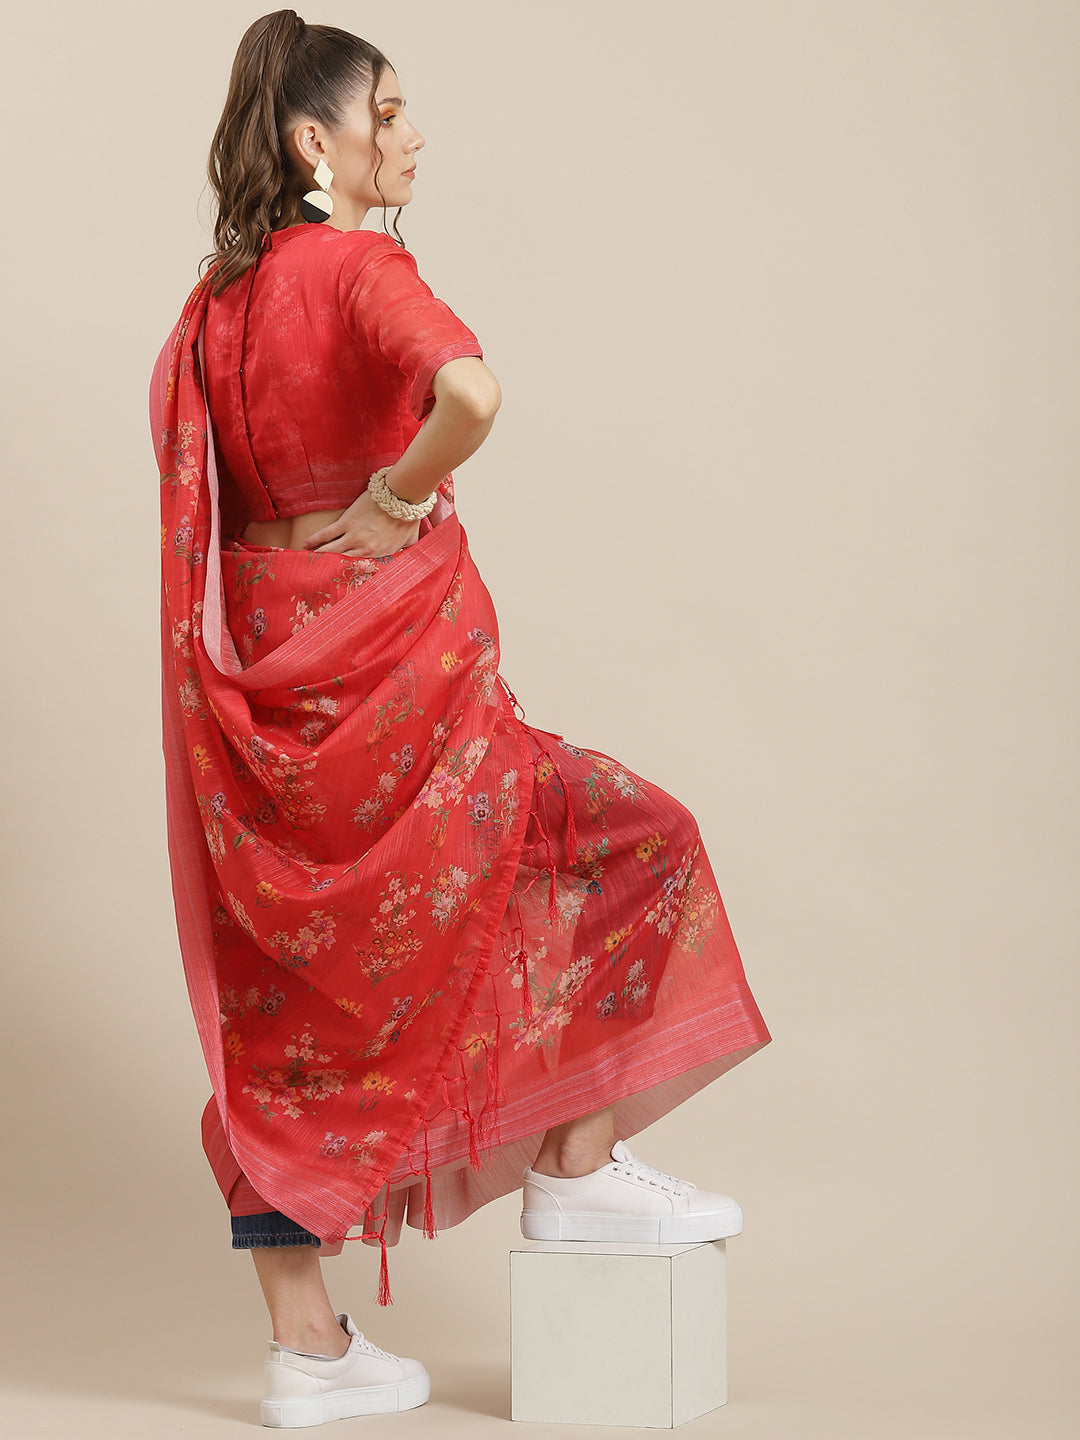 Women's Red Floral Print Saree With Blouse Piece - Aks